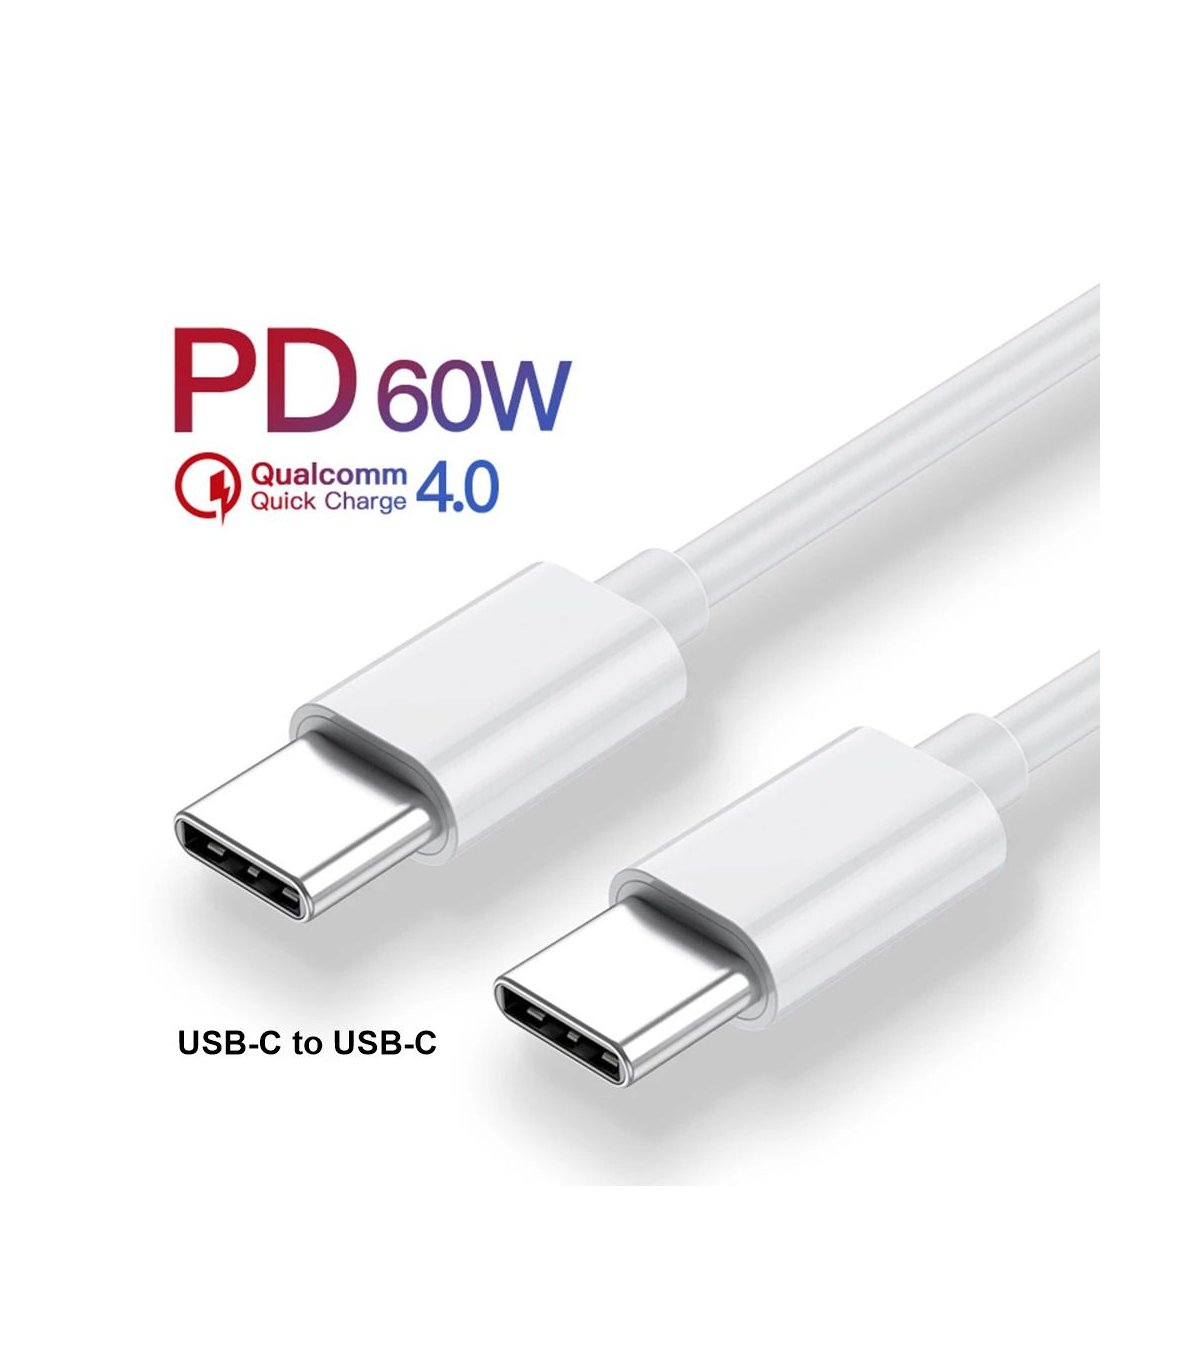 65W/100W USB-C to USB-C cables  USB Power Delivery (USB-PD